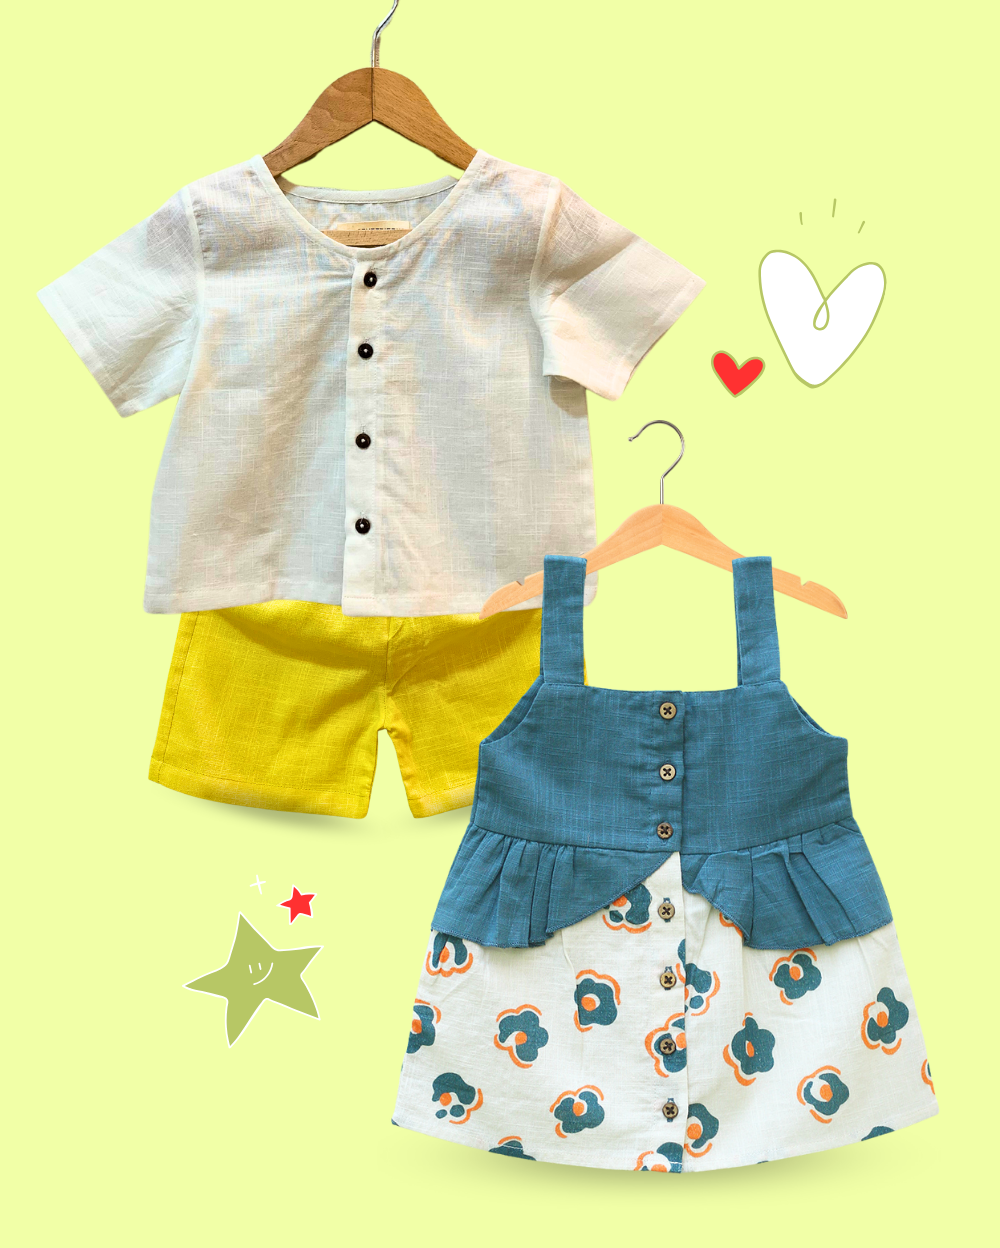 100% Organic Cotton White Top & Yellow Shorts Baby Set & Printed Frock for Baby Girls - 2 Piece Set